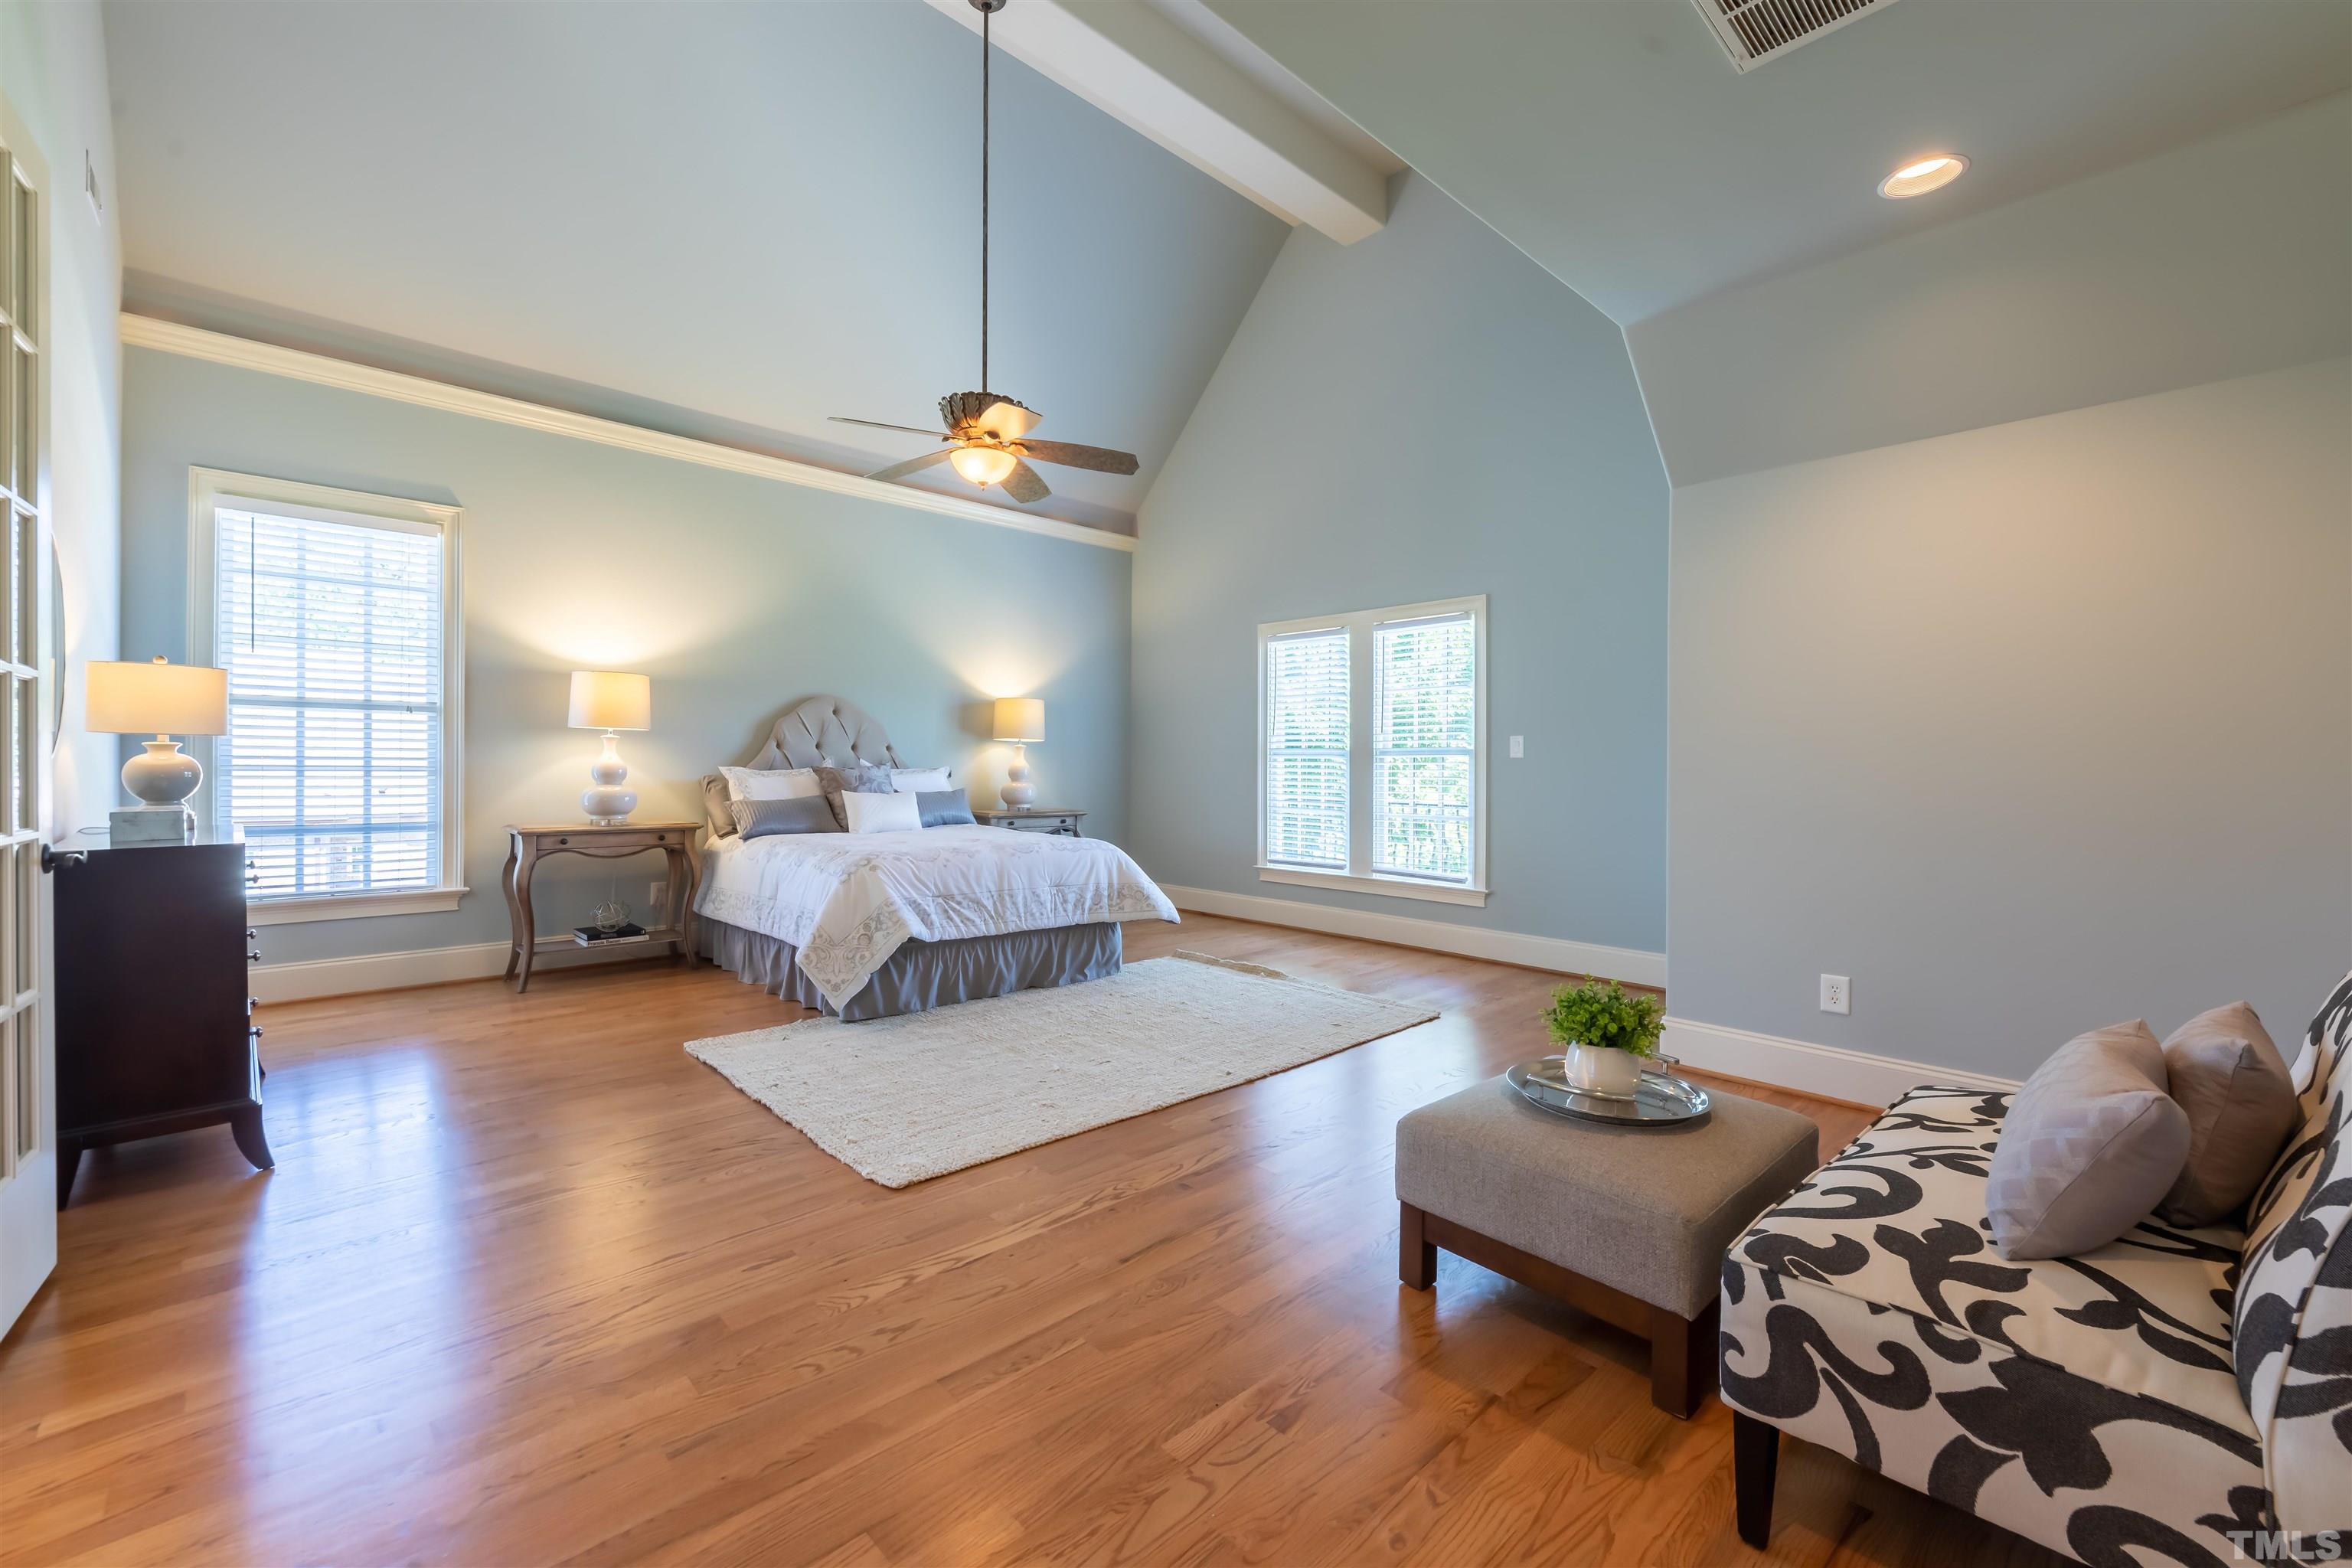 The second floor master bedroom is huge with vaulted a vaulted ceiling.  There are hardwoods in the bedroom and also in the hallway and loft.   The master sits at one end of the 2nd floor for some privacy.